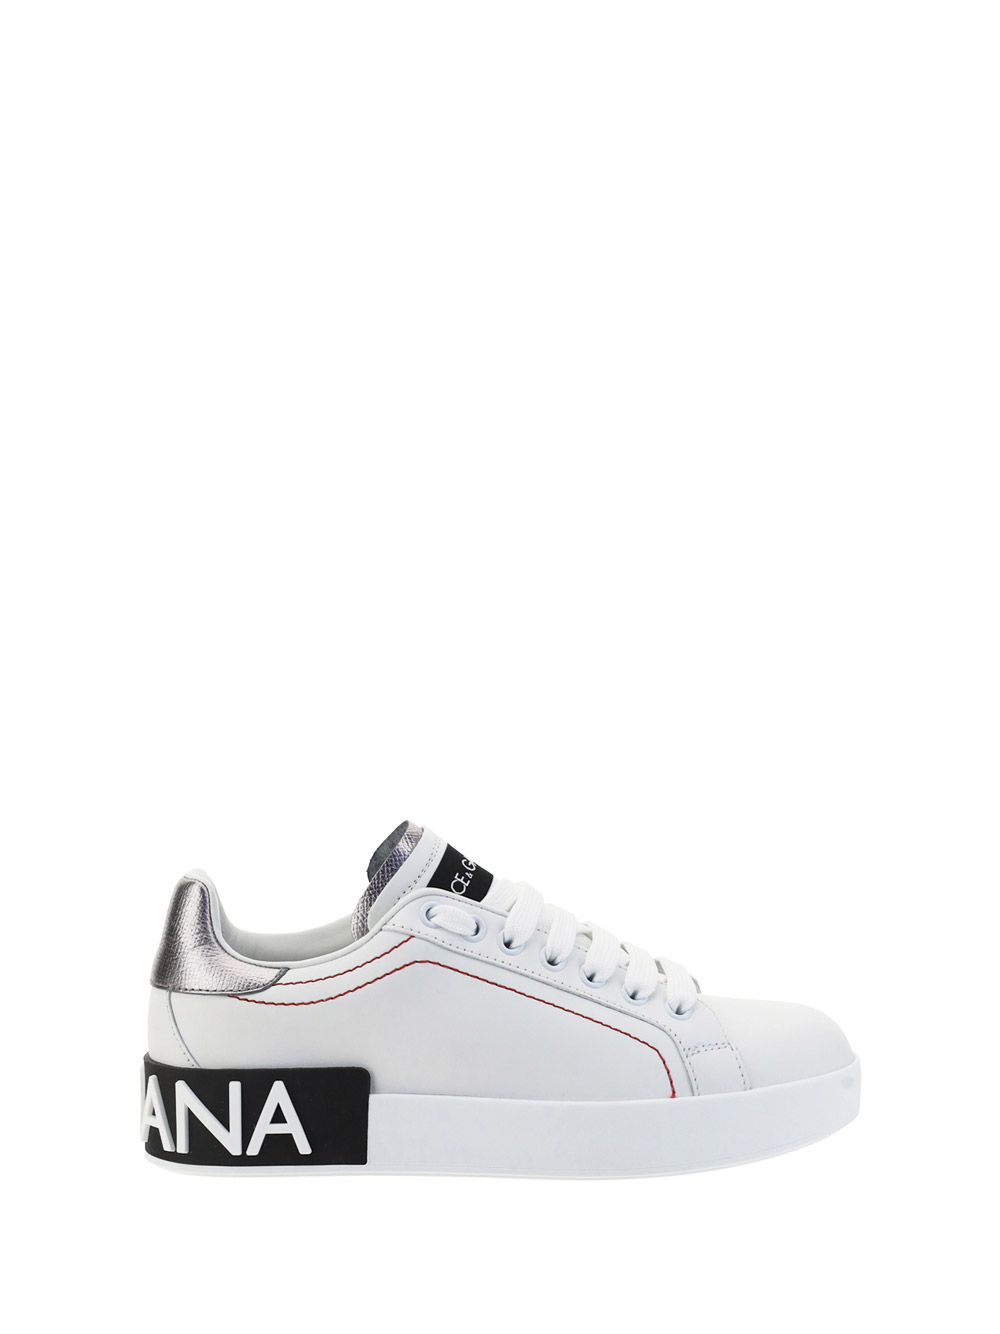 Dolce & Gabbana Sneakers In Bianco Argento